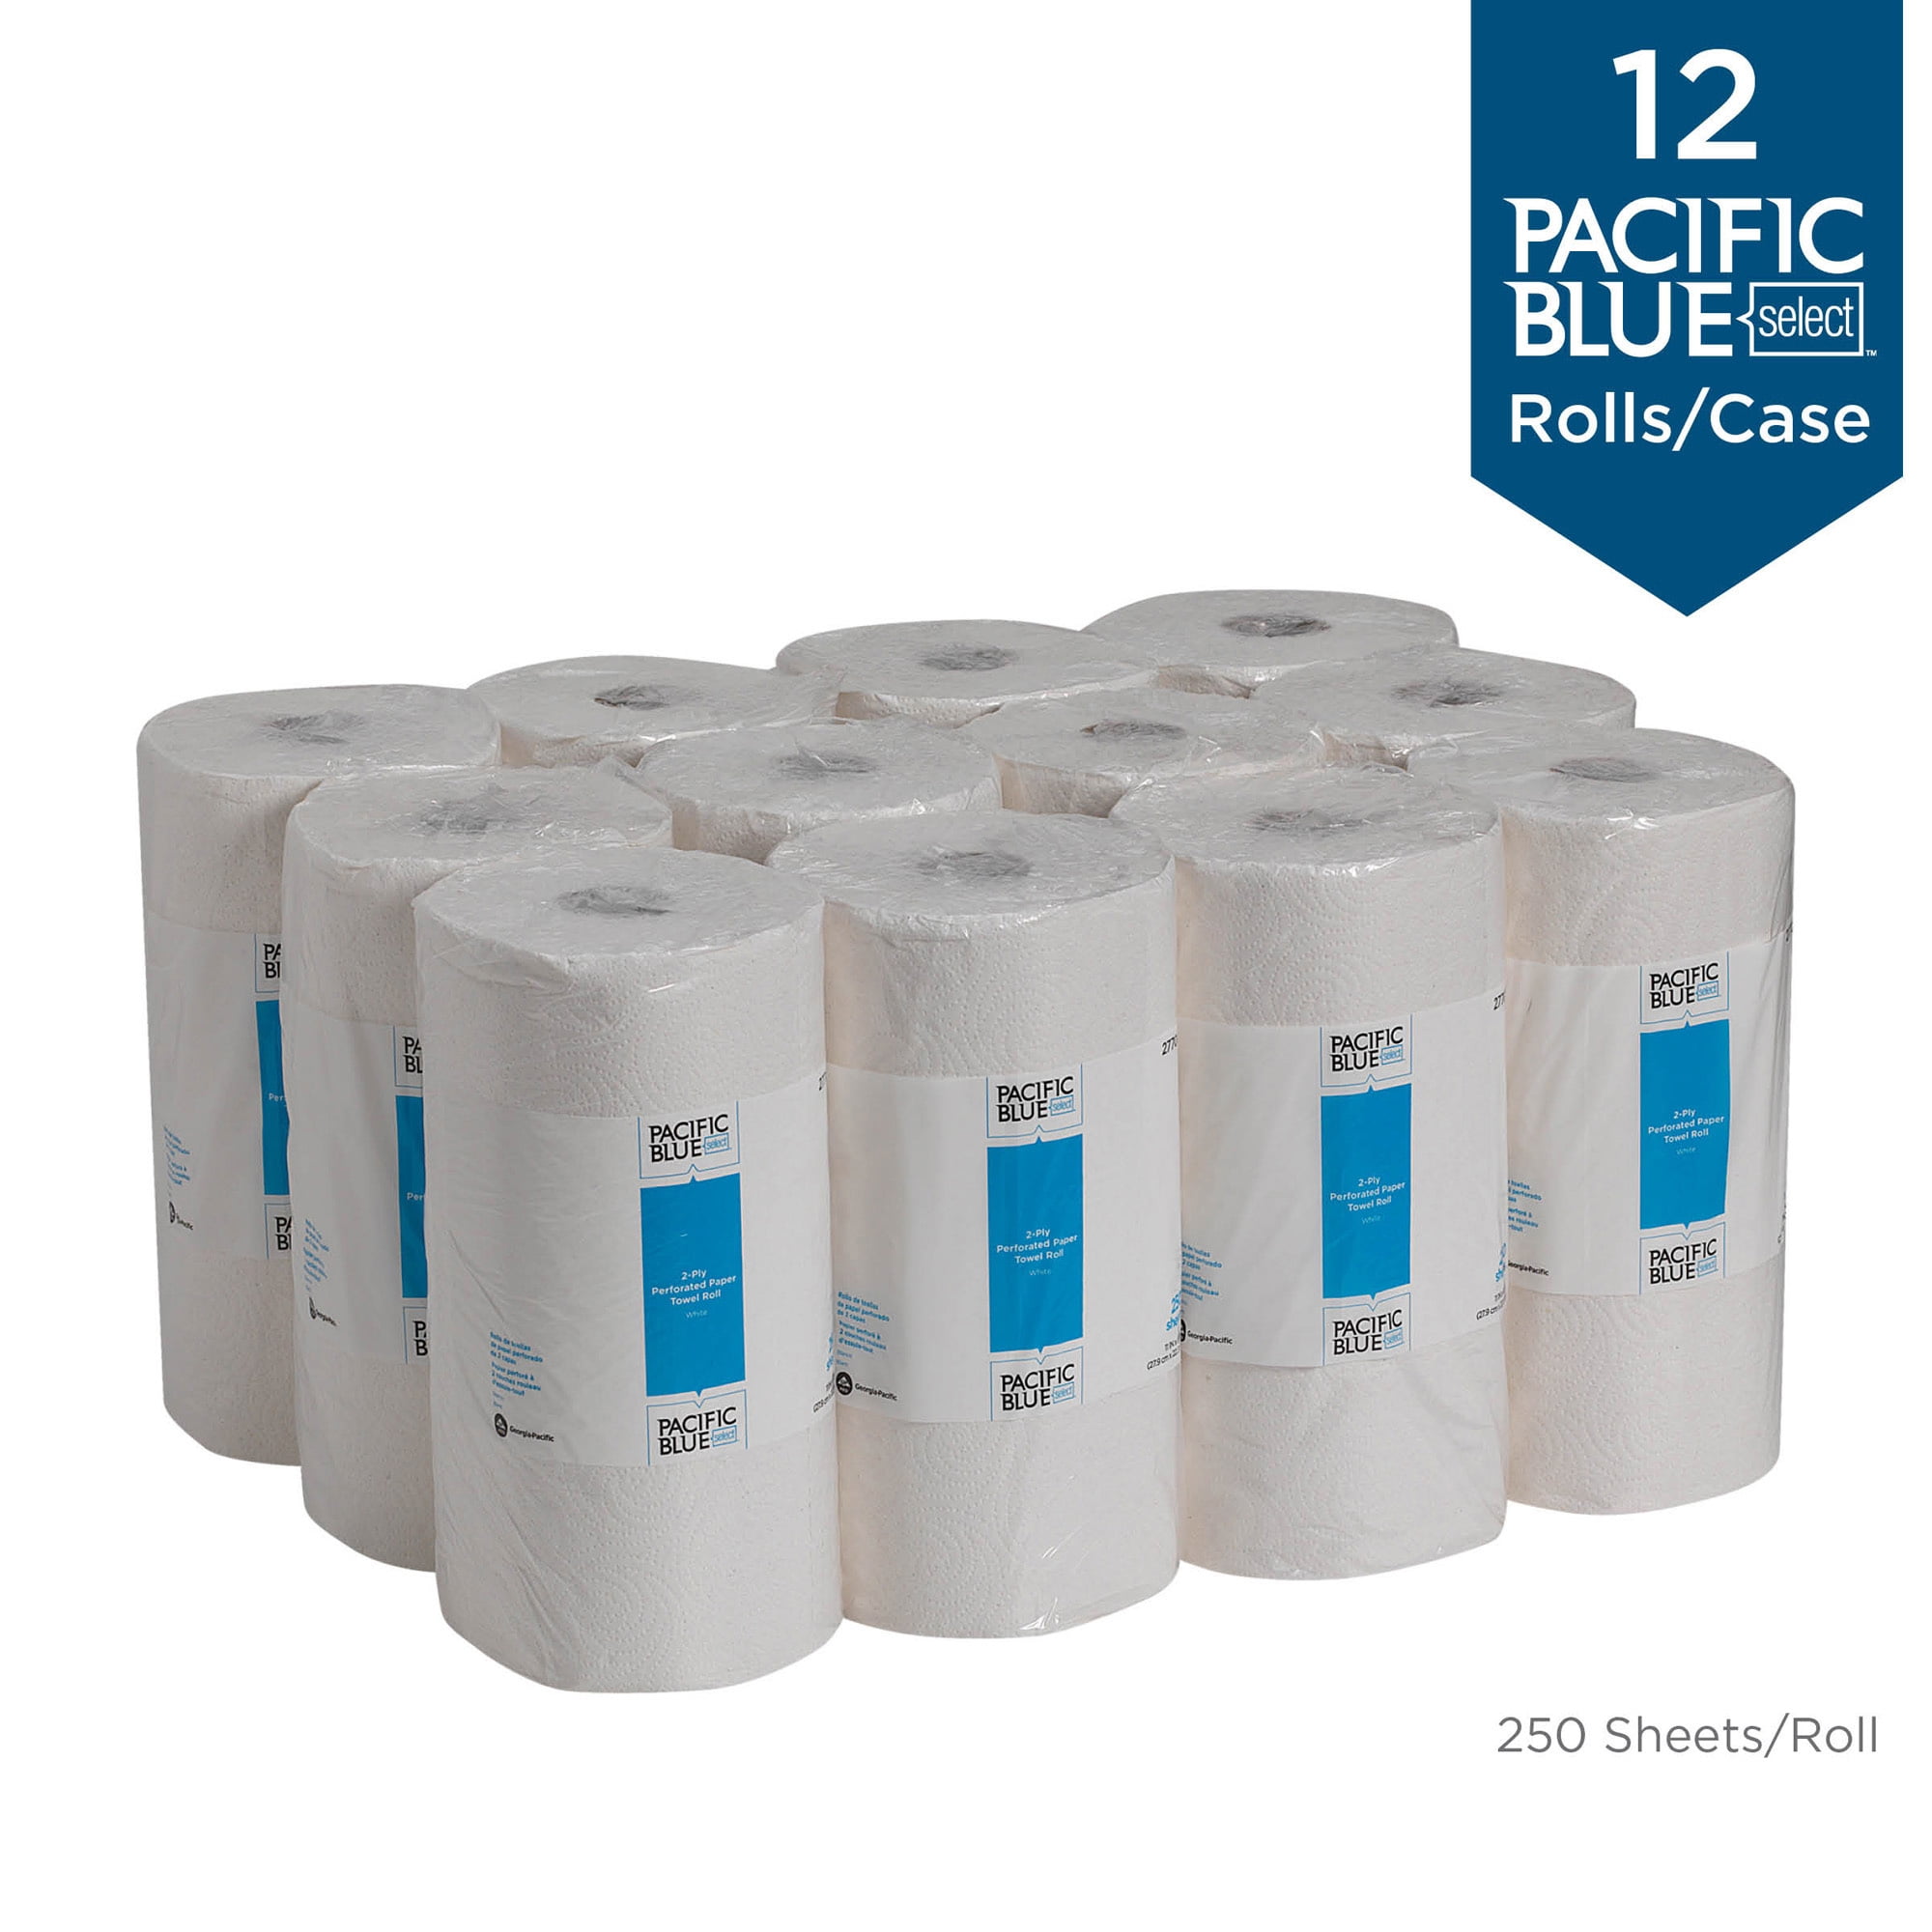 Pacific Blue Select Premium 2-Ply Paper Towel Roll Previously Branded Signature 